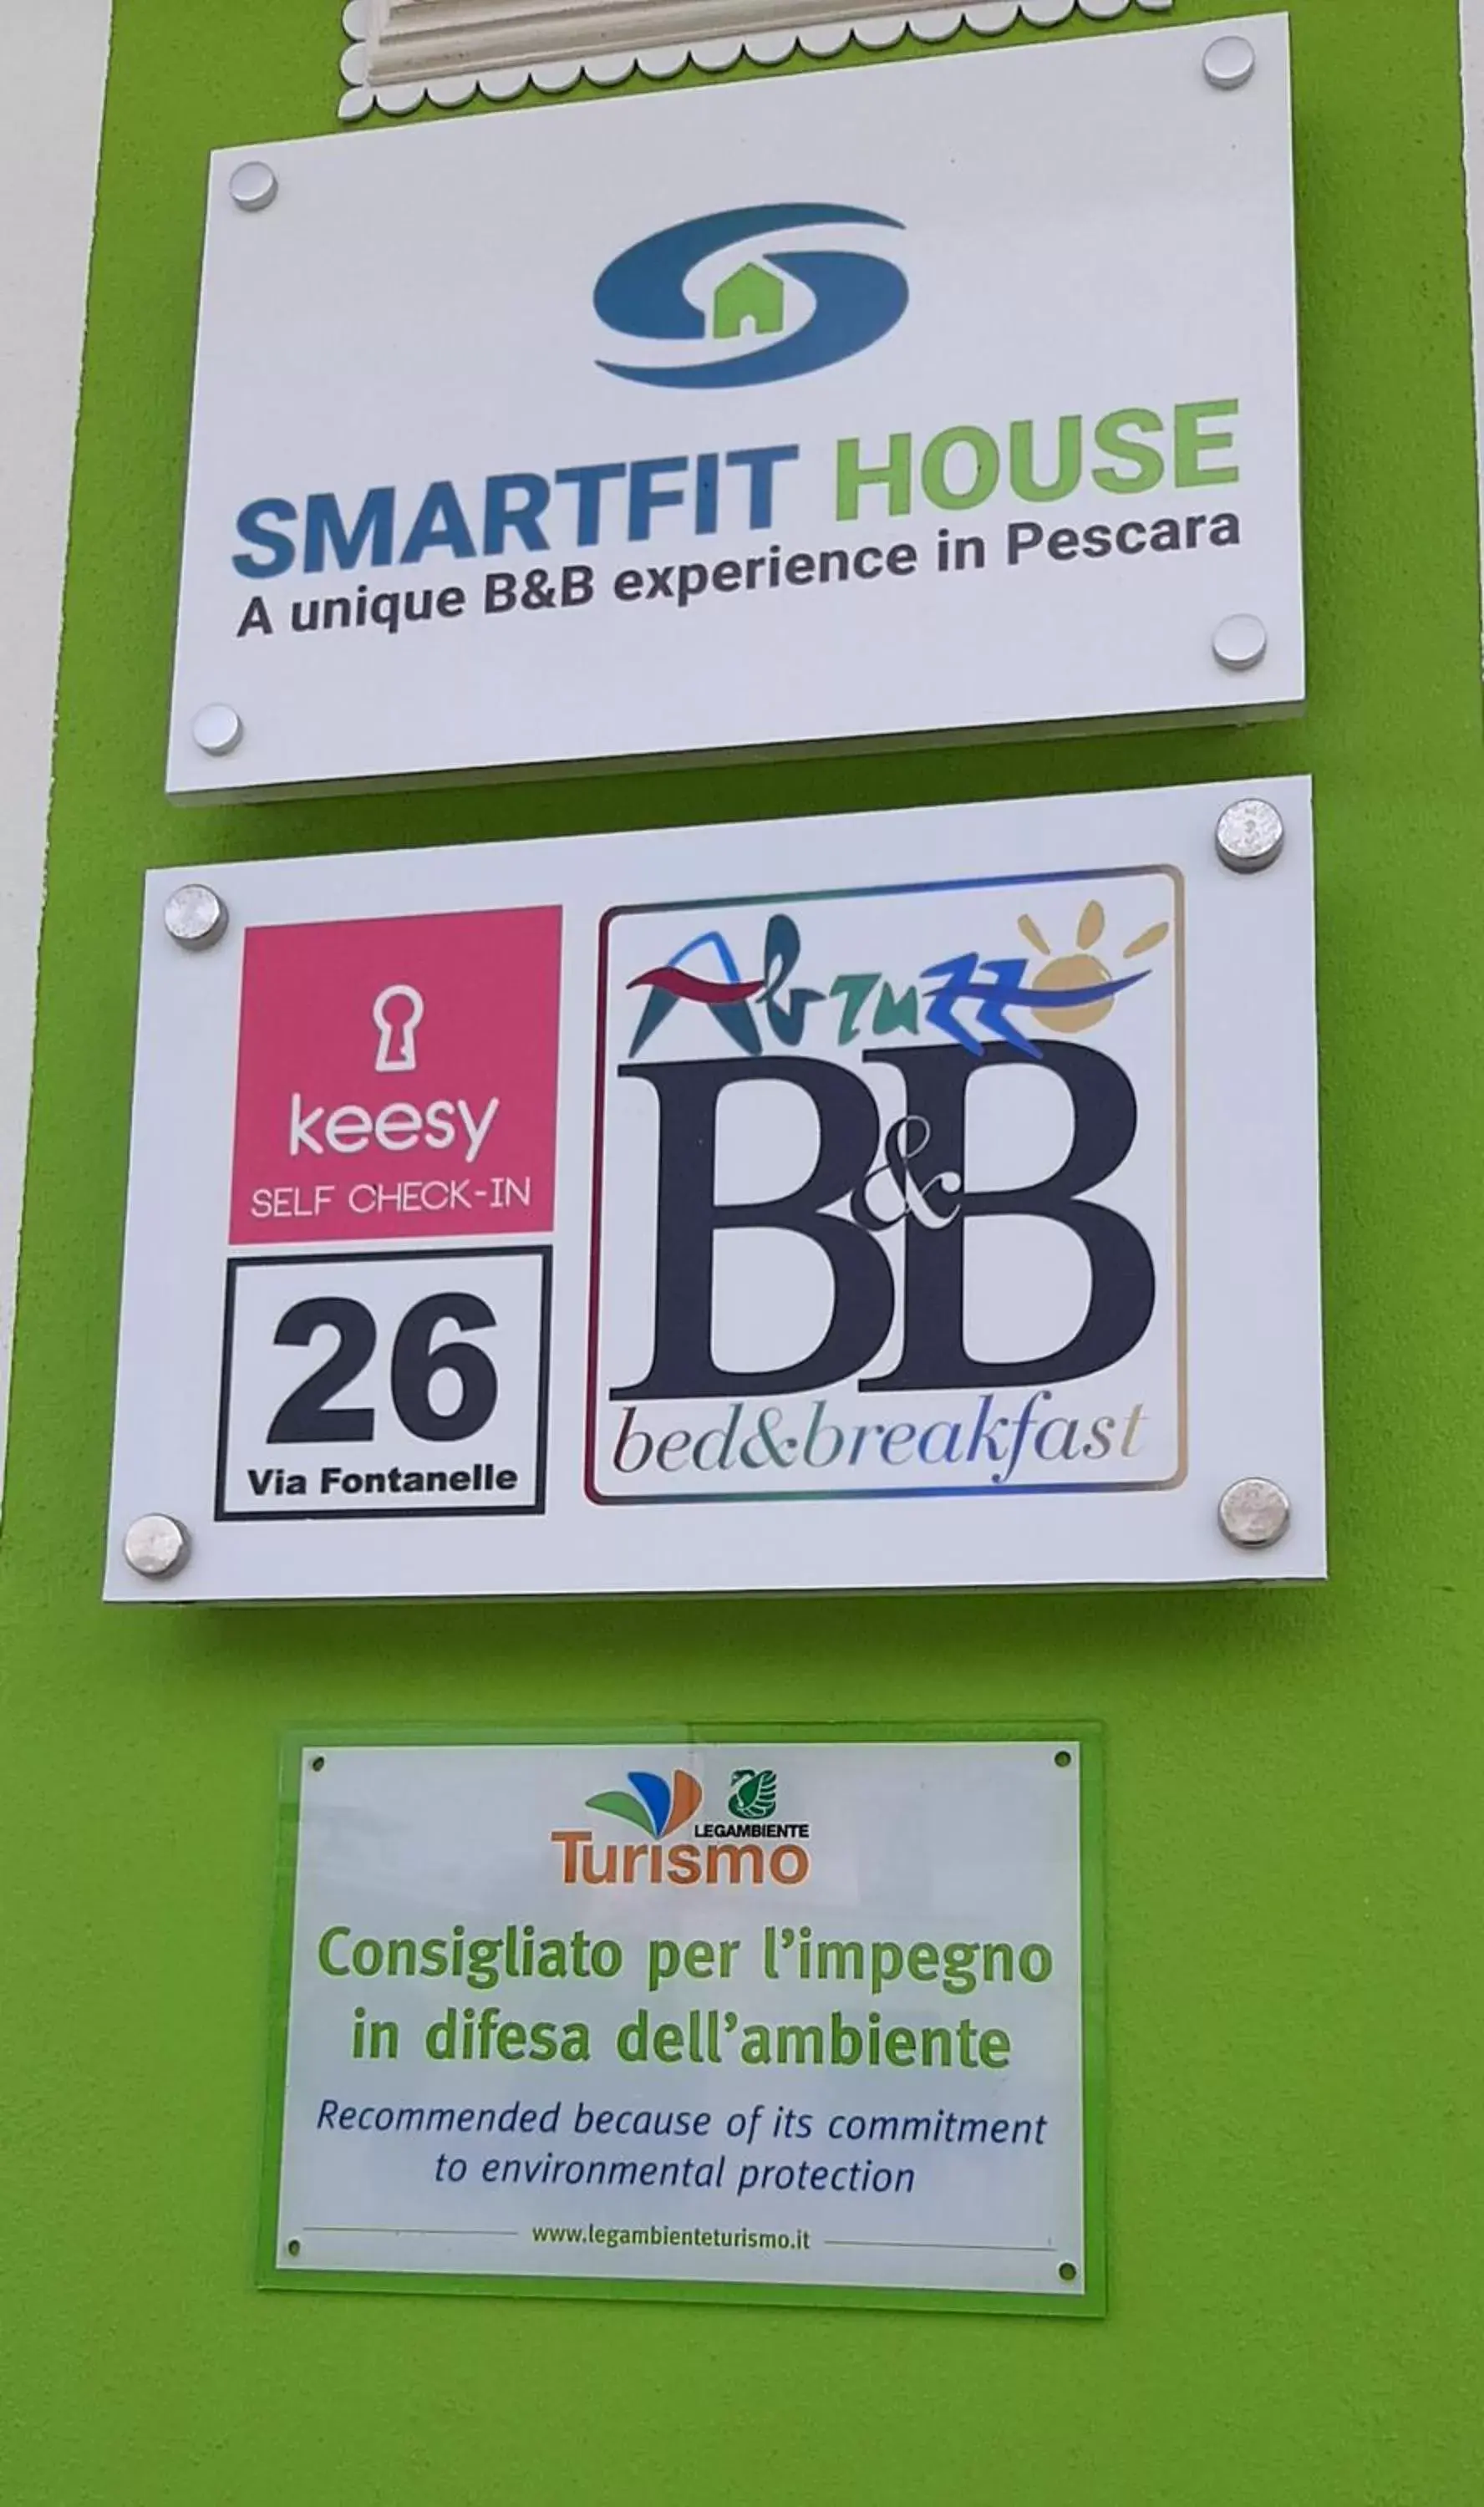 Property logo or sign in SMARTFIT HOUSE a unique B&B experience in Pescara